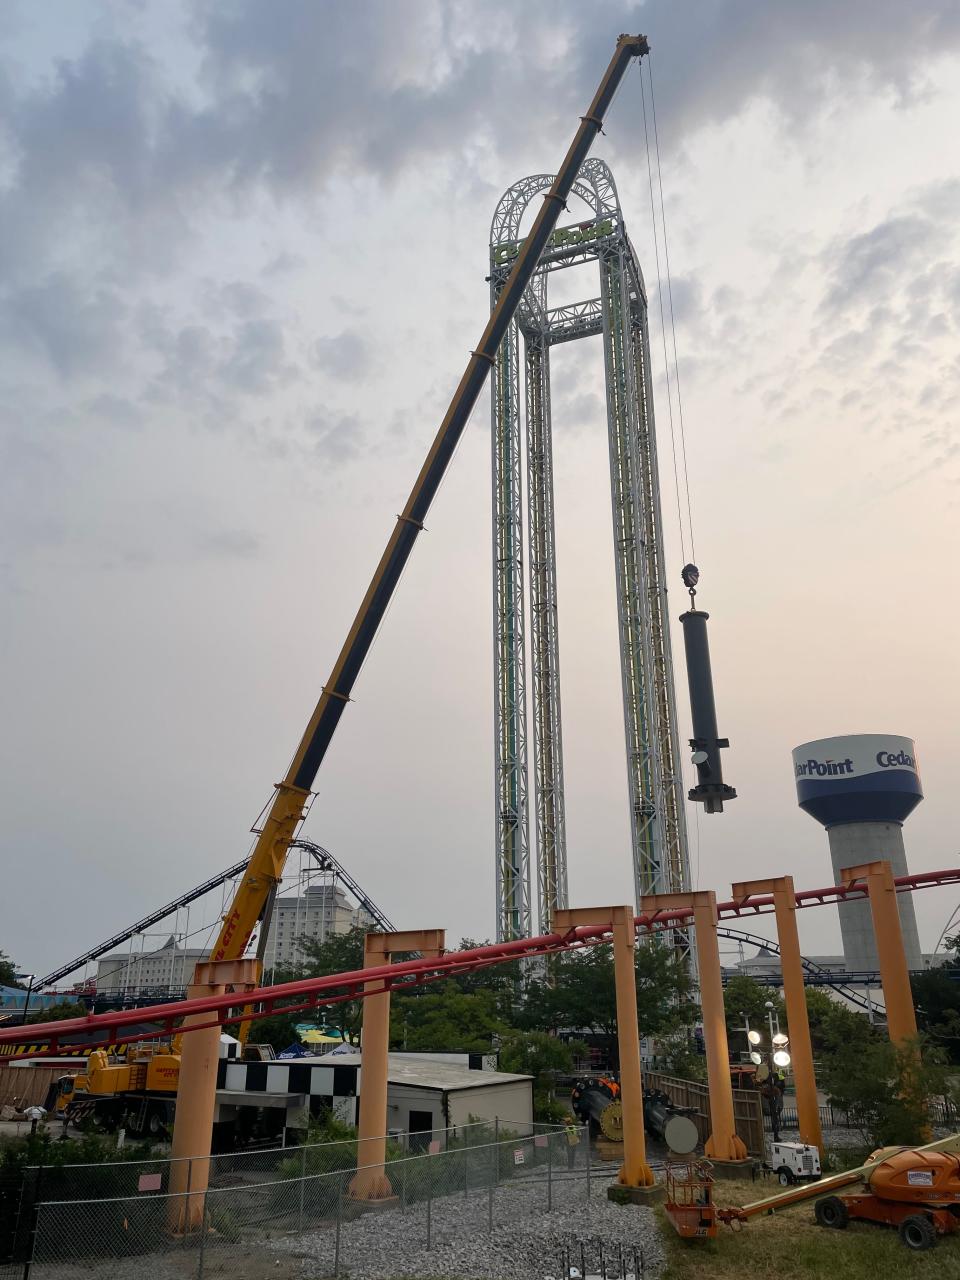 Cedar Point will be home to world's tallest, fastest triplelaunch